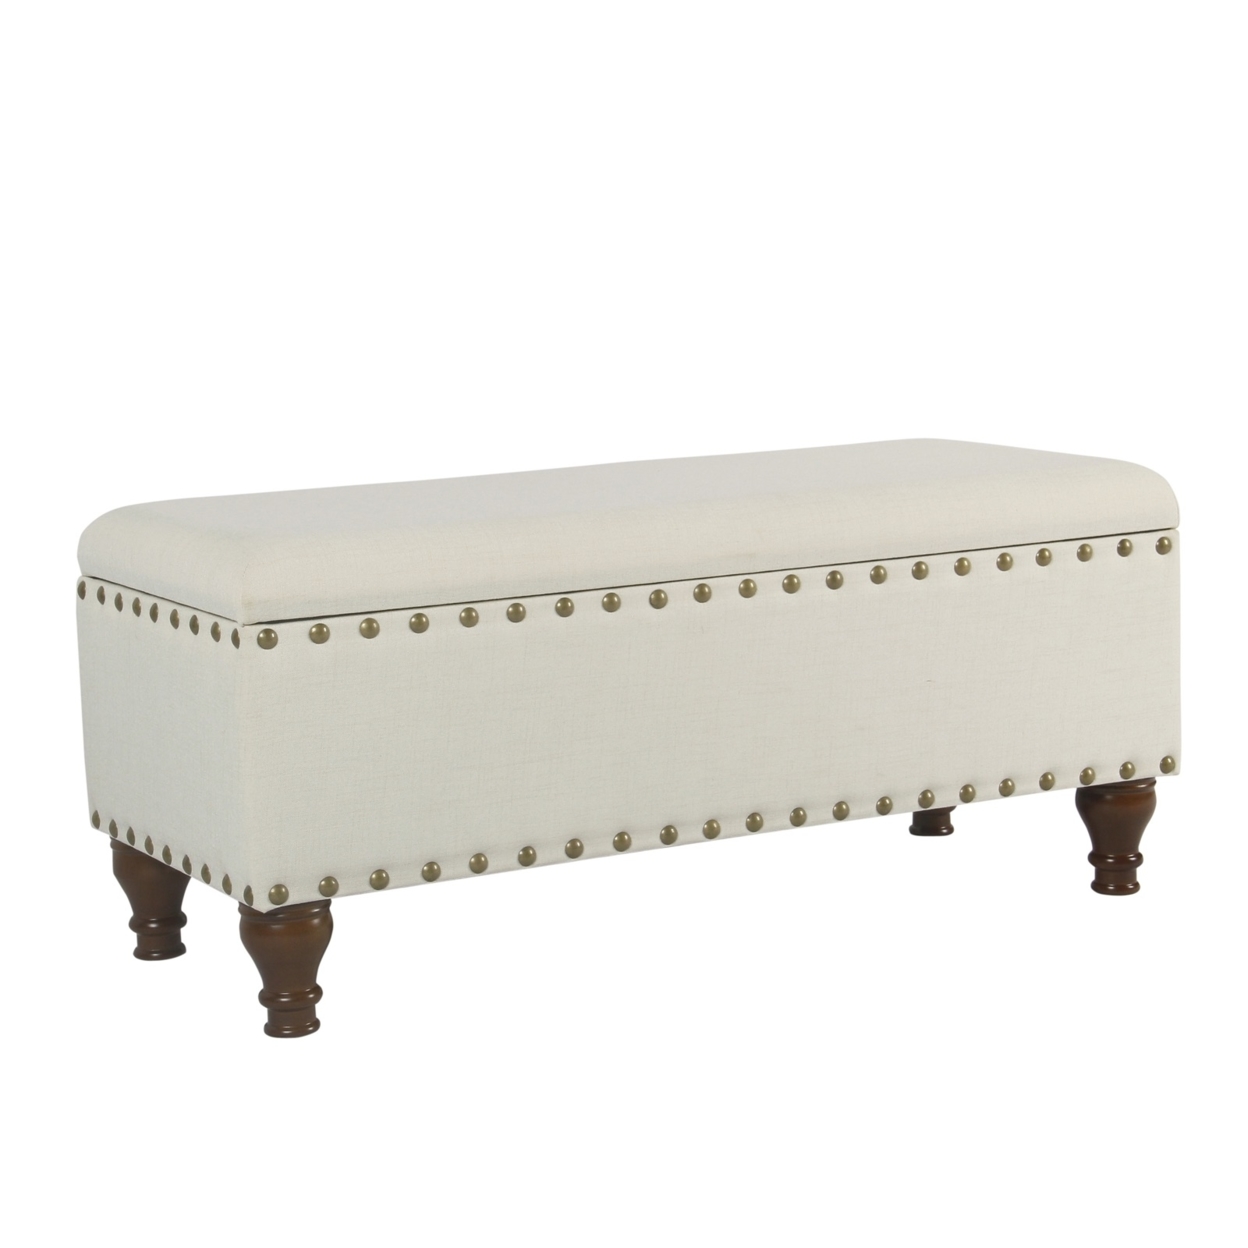 Saltoro Sherpi Fabric Upholstered Wooden Storage Bench With Nail head Trim, Large, Cream and Brown